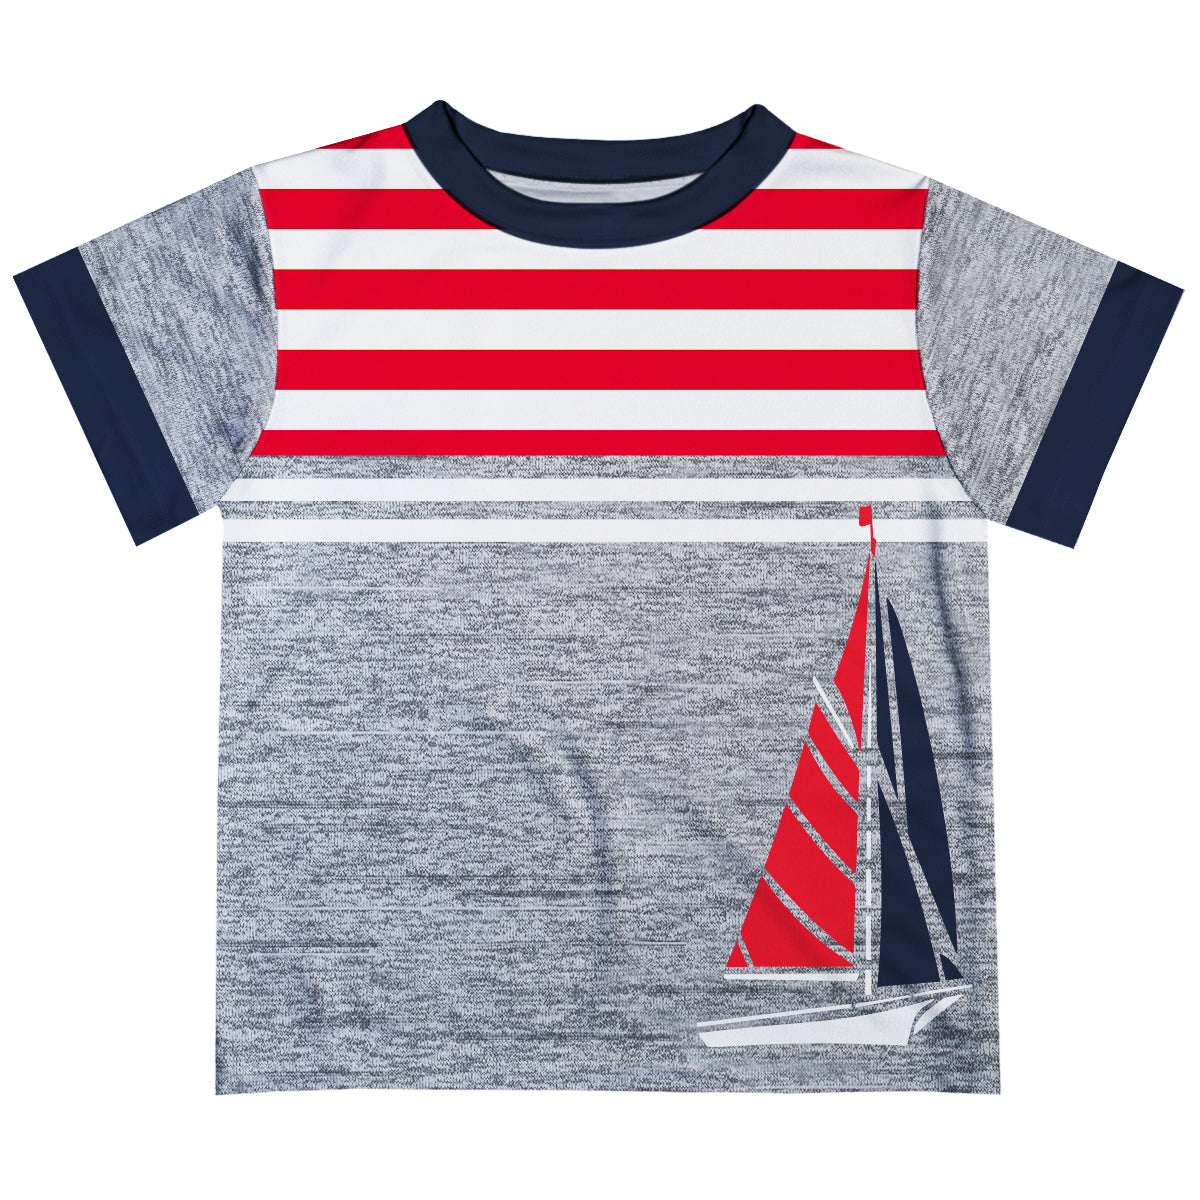 Sailboat Red White And Gray Short Sleeve Tee Shirt - Wimziy&Co.